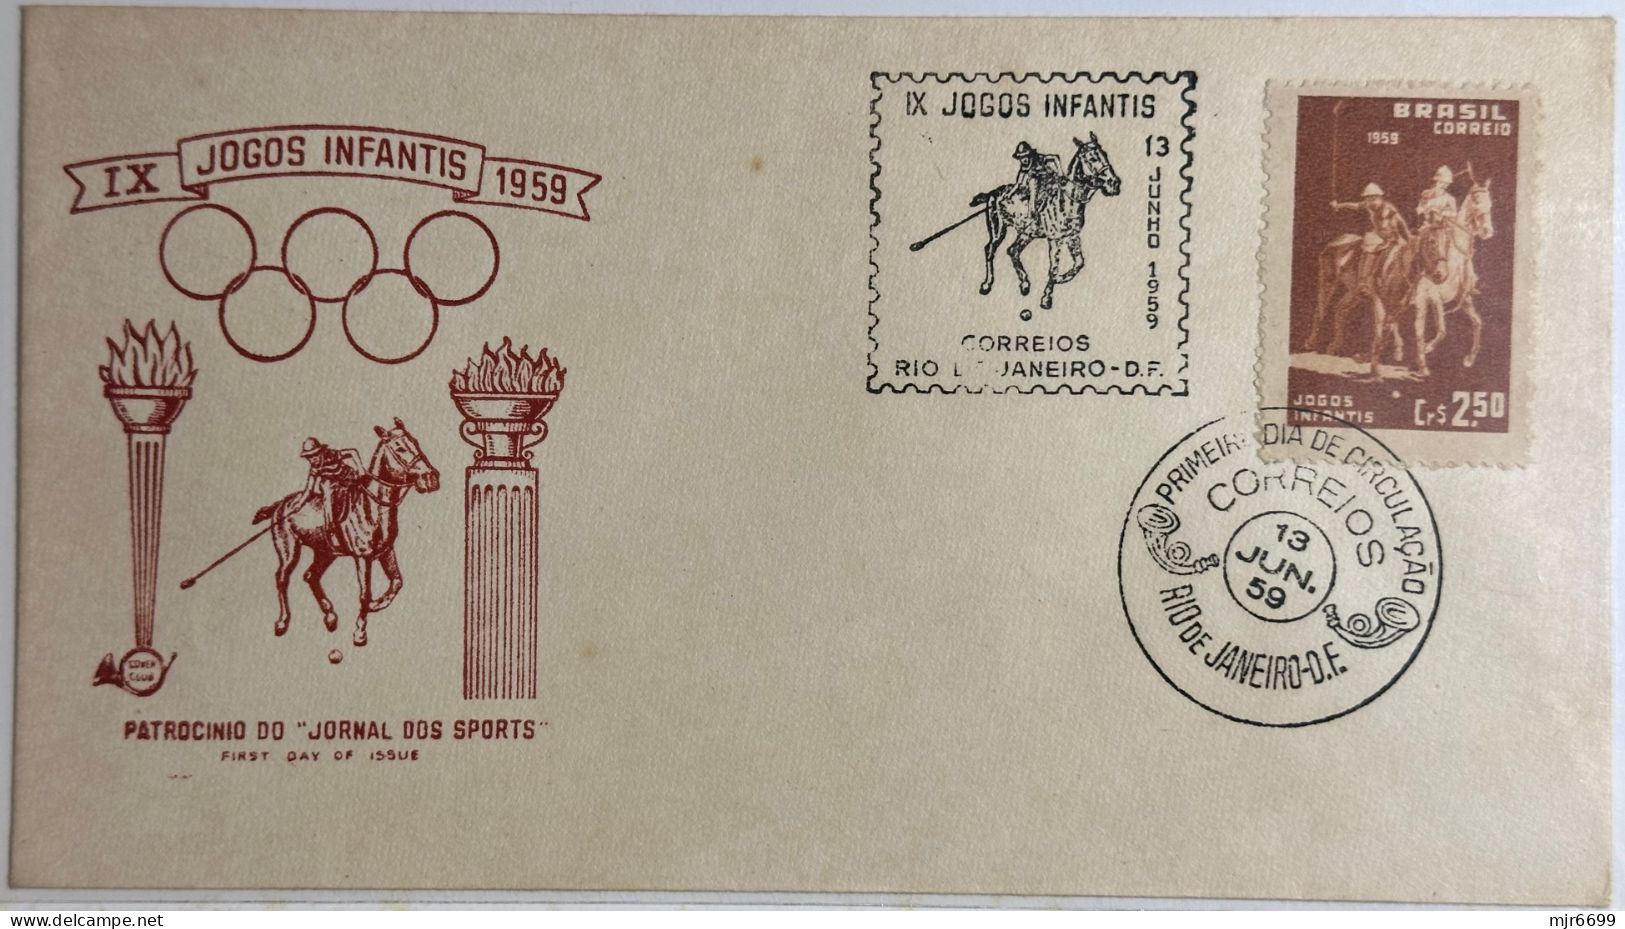 1959 COVER WITH "IX JOGOS INFANTIS" STAMPS, FIRST DAY CANCELLATION - Lettres & Documents